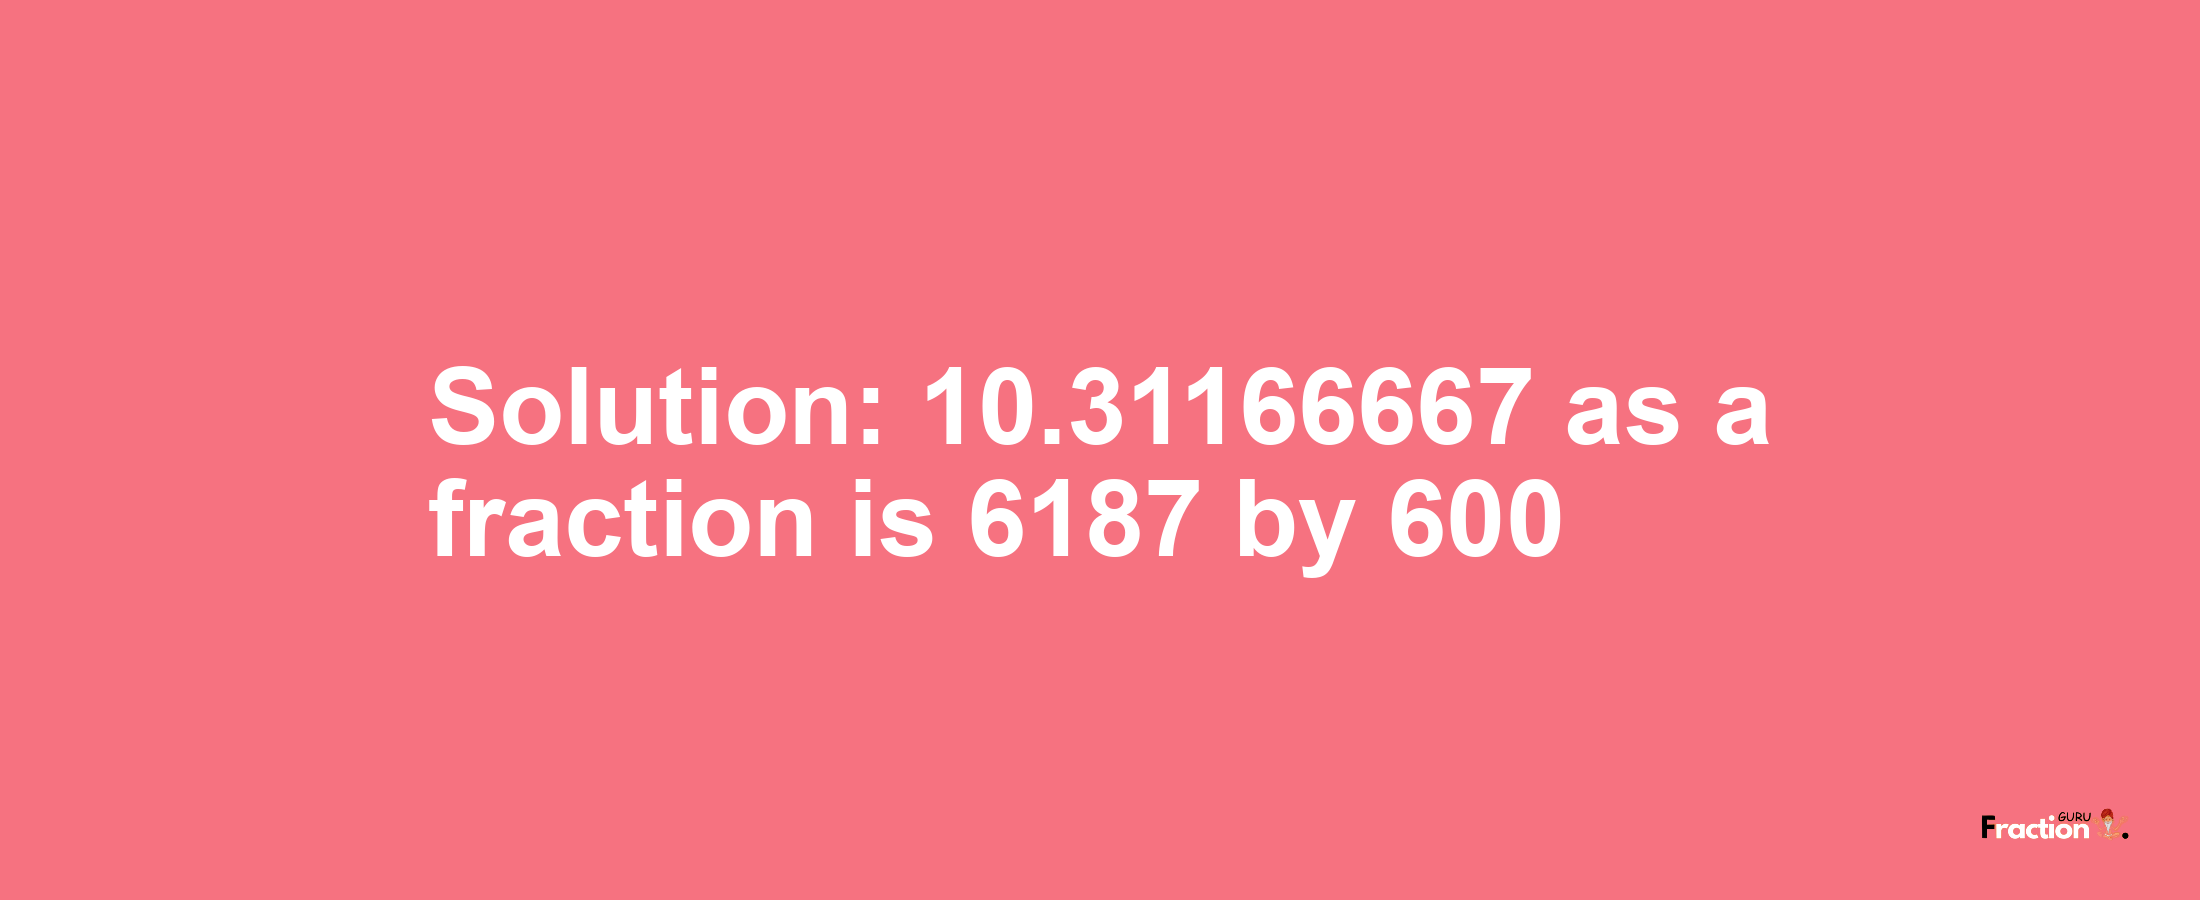 Solution:10.31166667 as a fraction is 6187/600